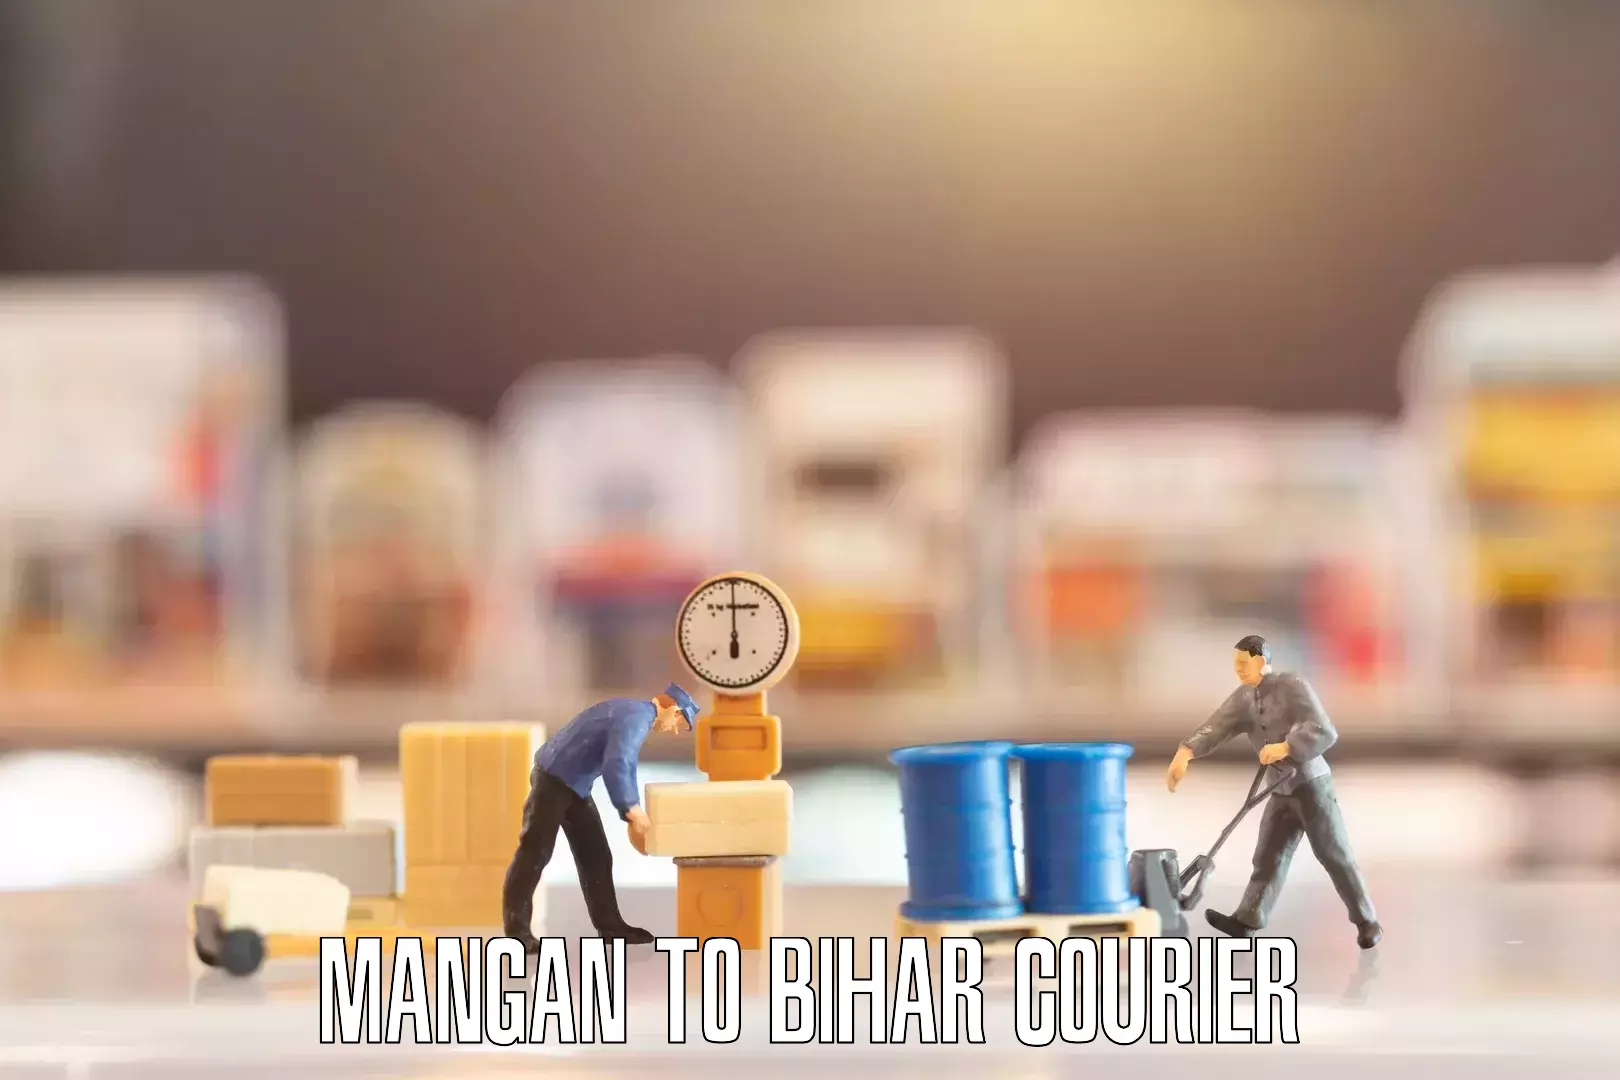 Quality relocation services Mangan to Biraul